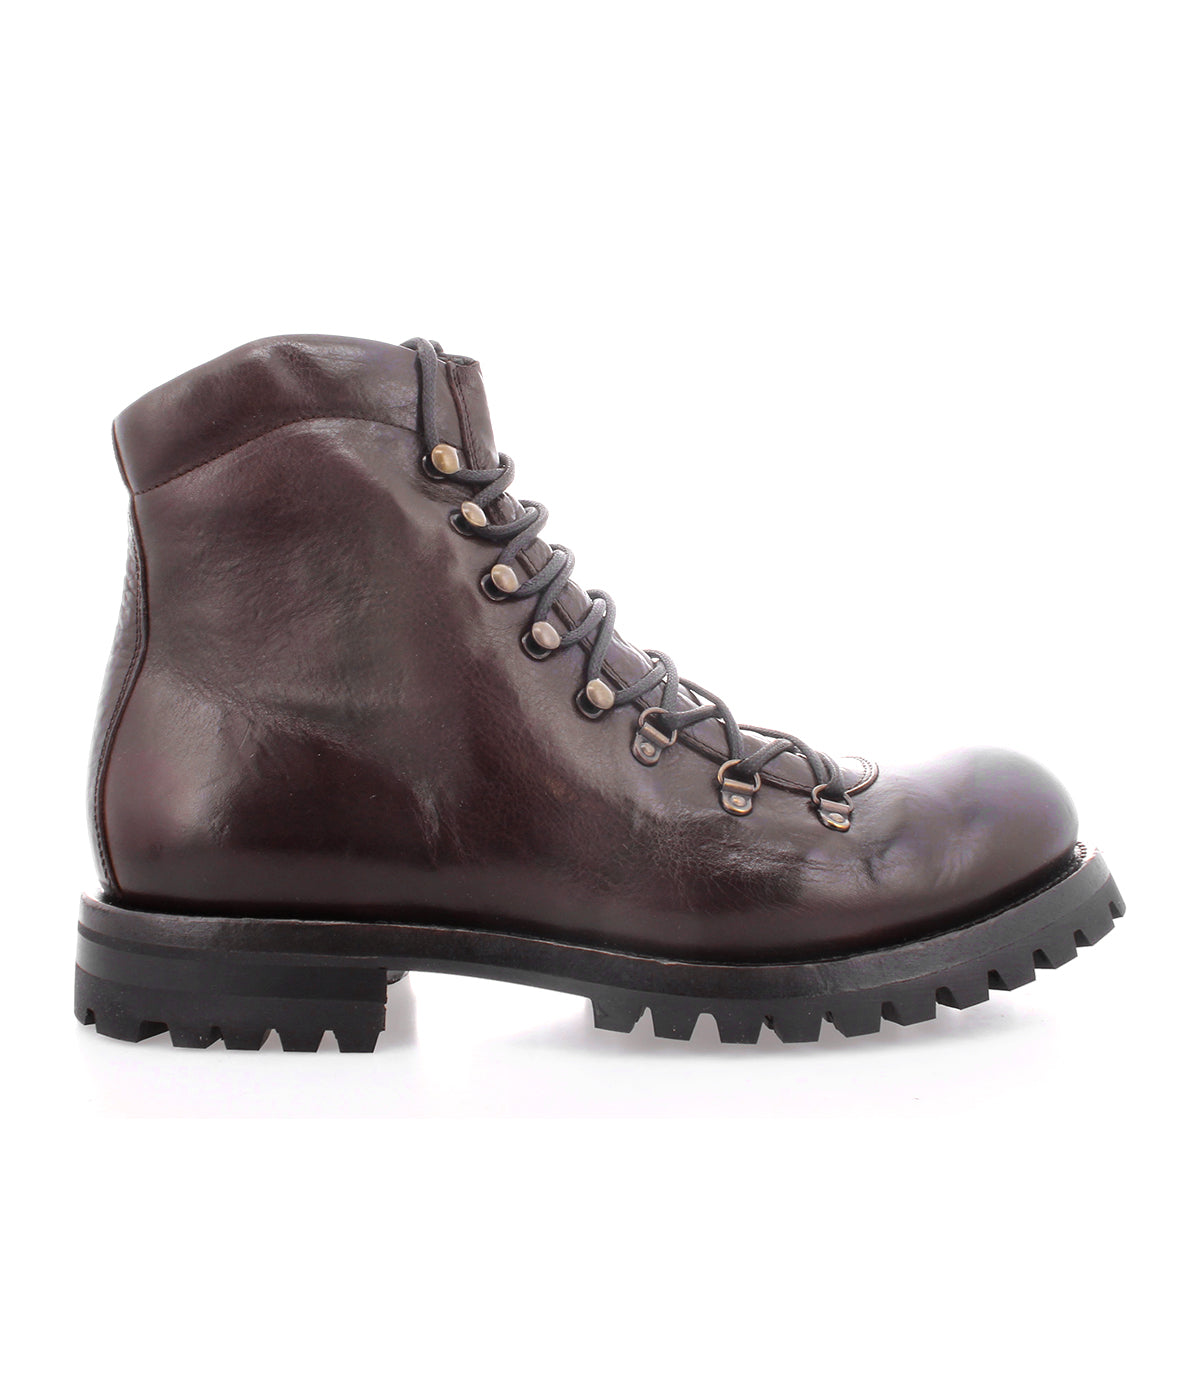 A durable Bed Stu Barge men's leather hiking boot designed for exceptional comfort, showcased against a clean white background.